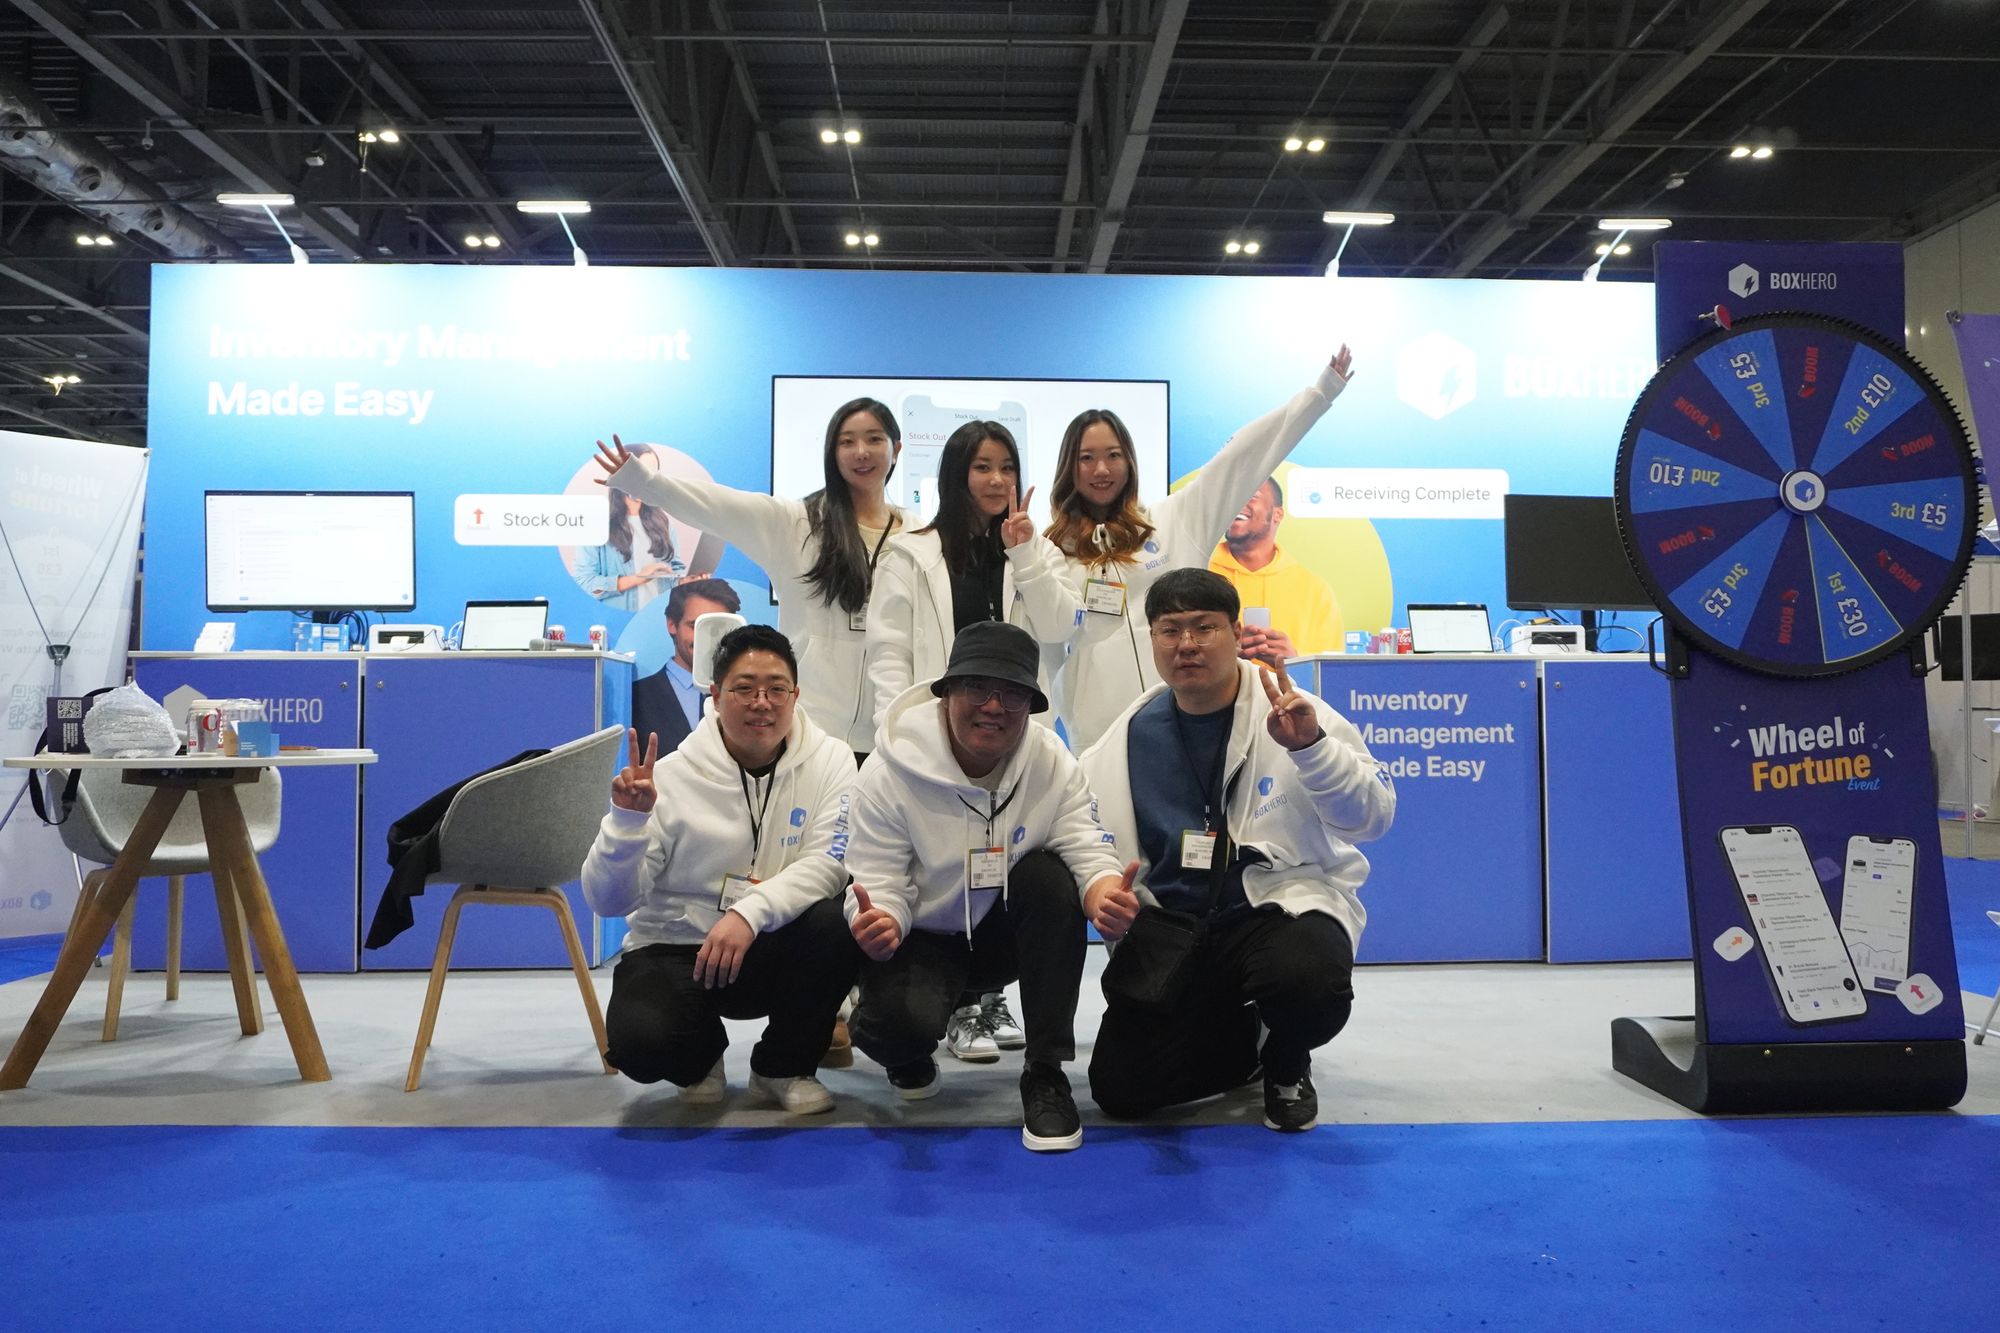 BoxHero team members taking a photo with the booth in the background